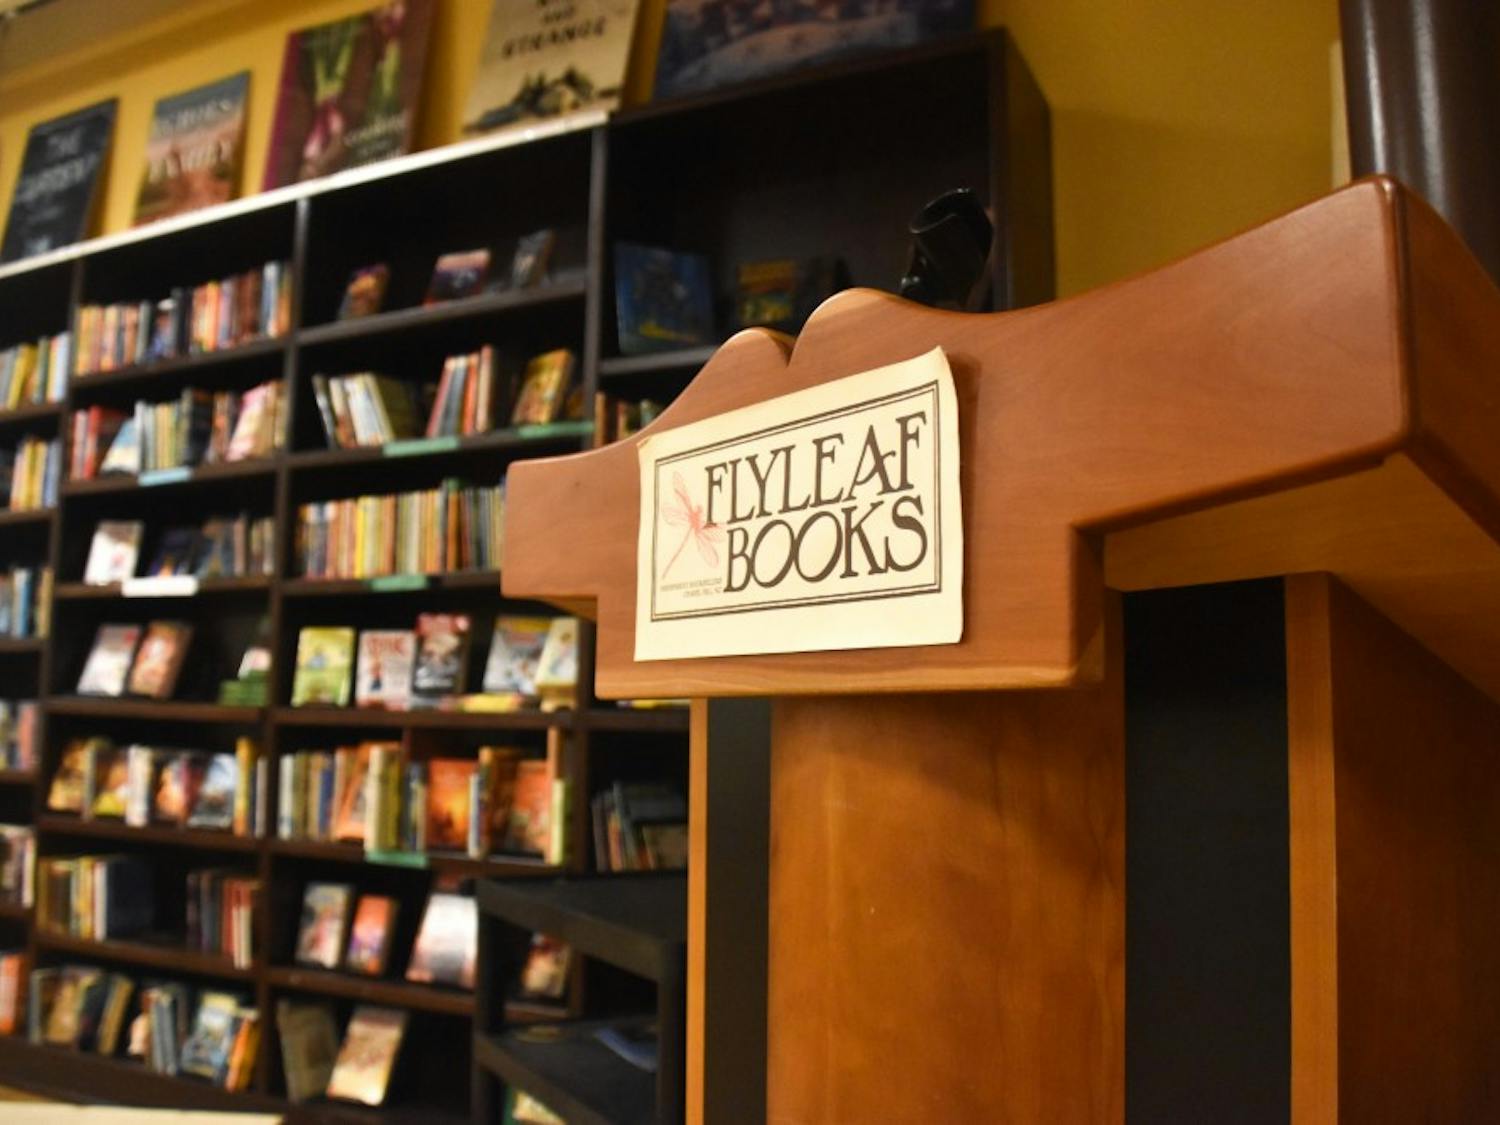 Flyleaf Books is located on Martin Luther King Jr. Blvd., in Chapel Hill, North Carolina.&nbsp;